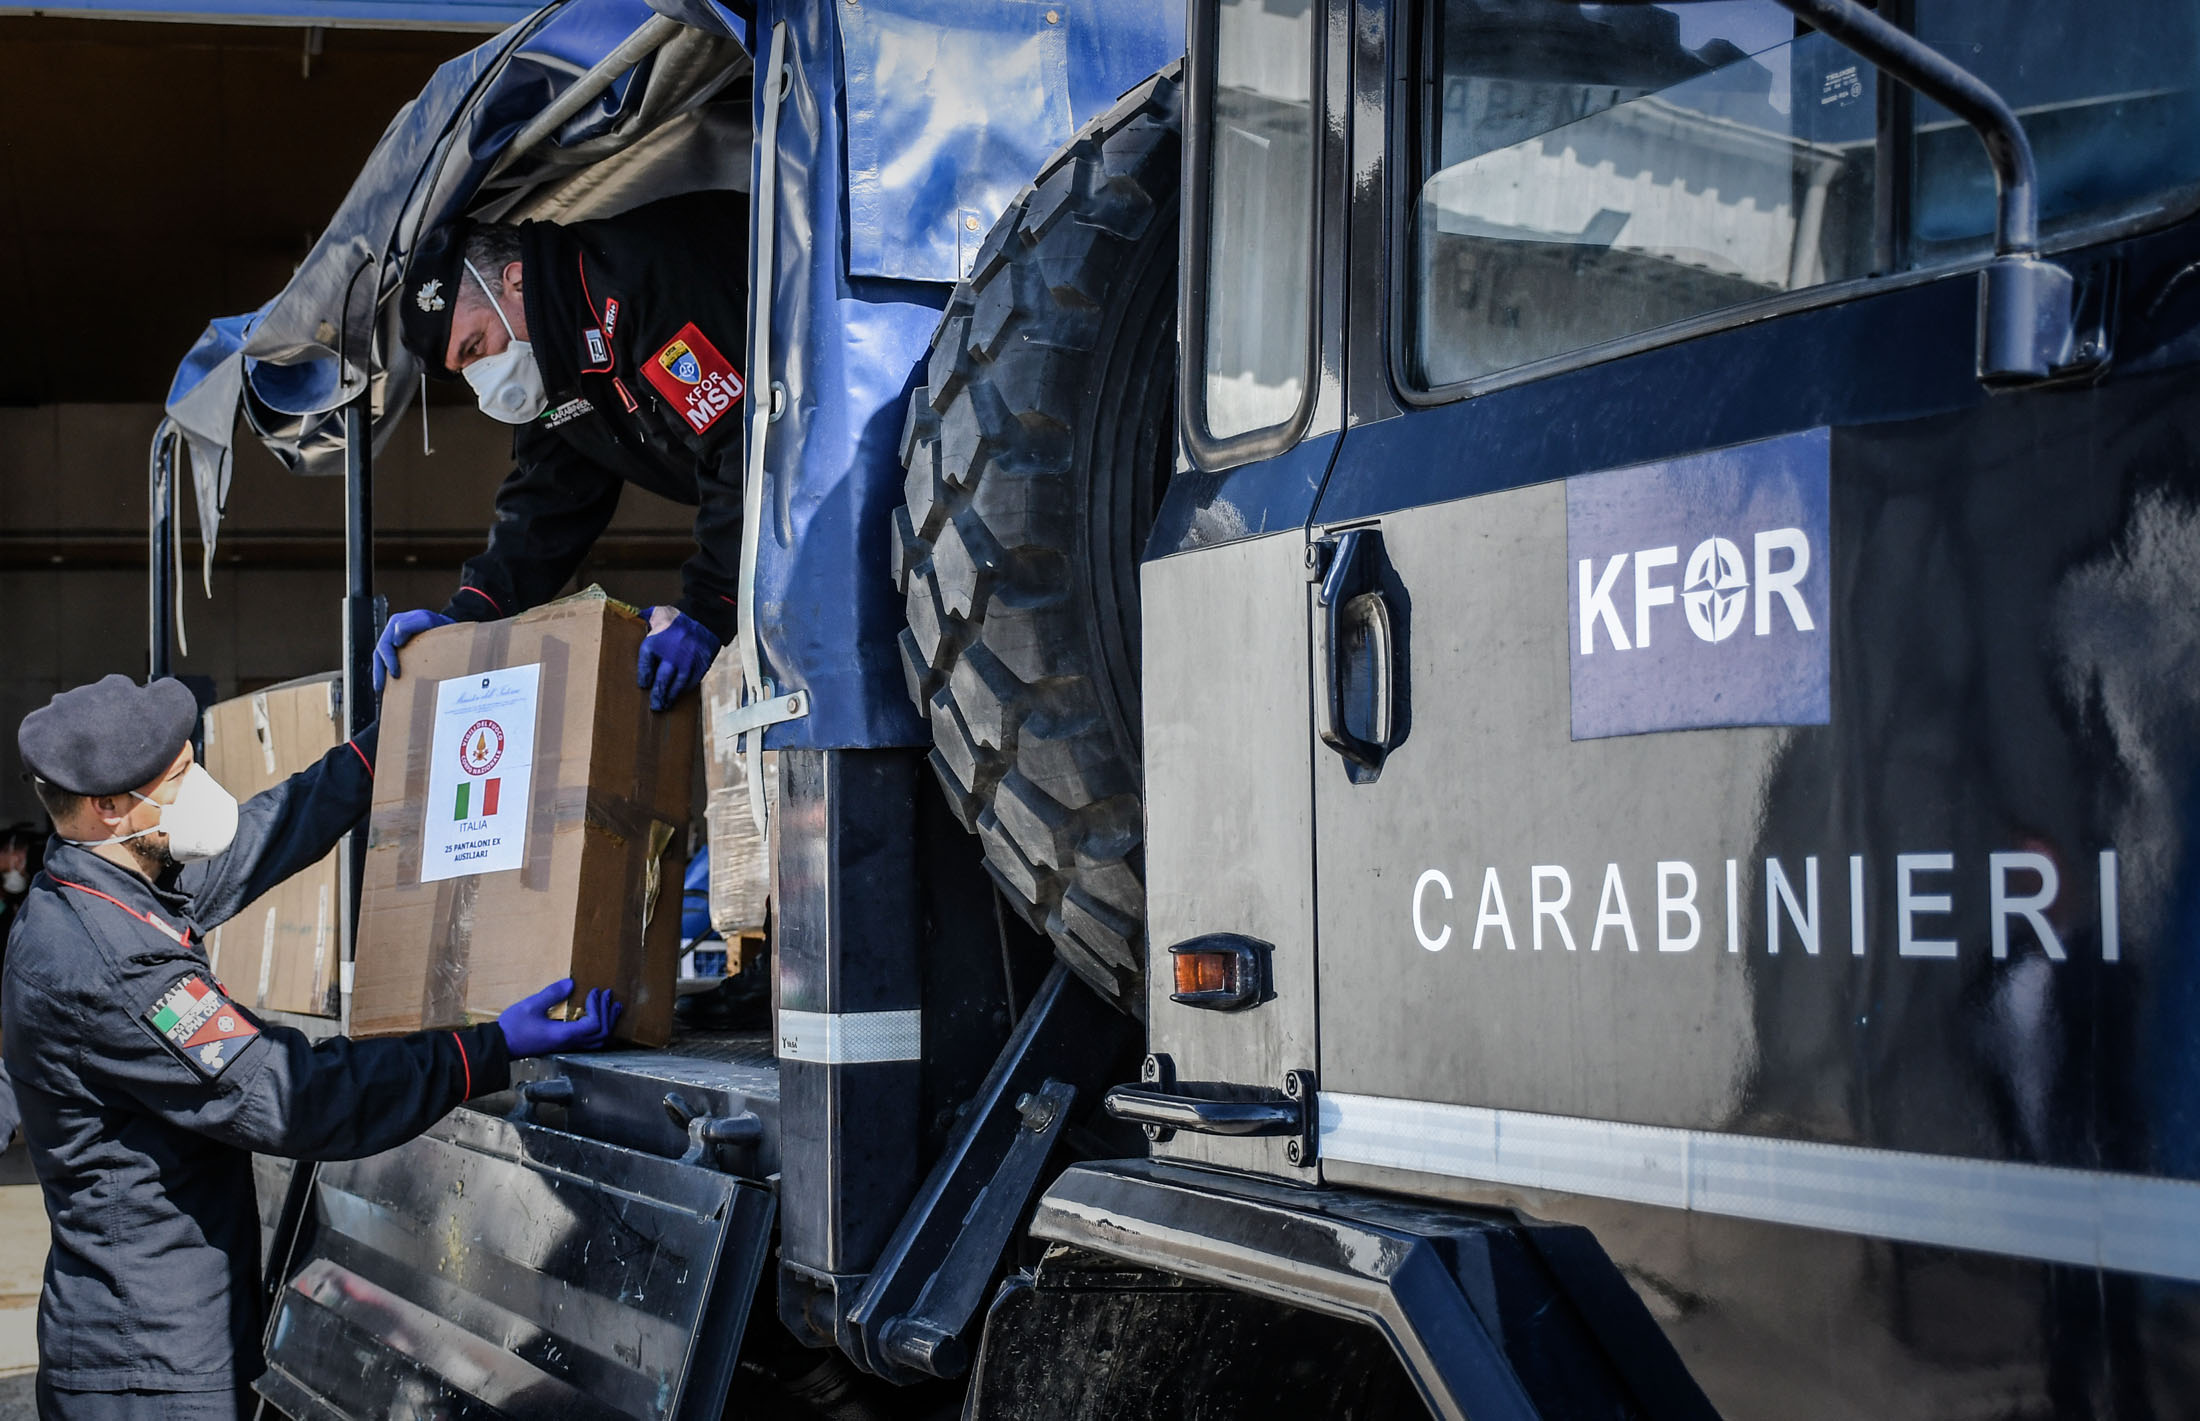 Photo: KFOR providing assistance to local communities in Kosovo to help fight he COVID-19 pandemic Credit: NATO